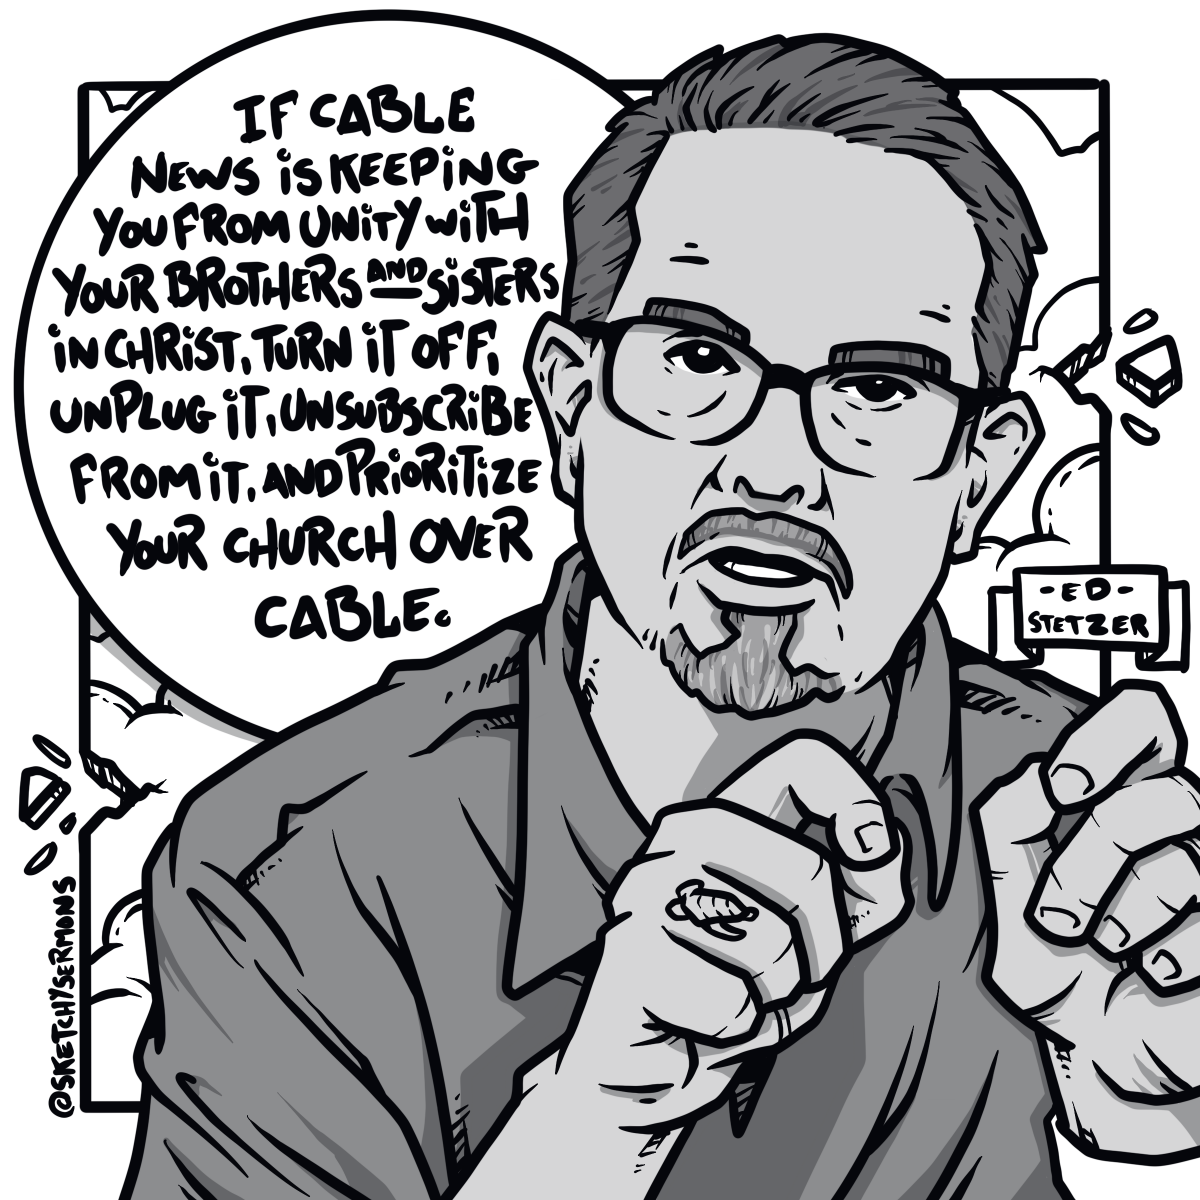 Ed Stetzer on Cable News